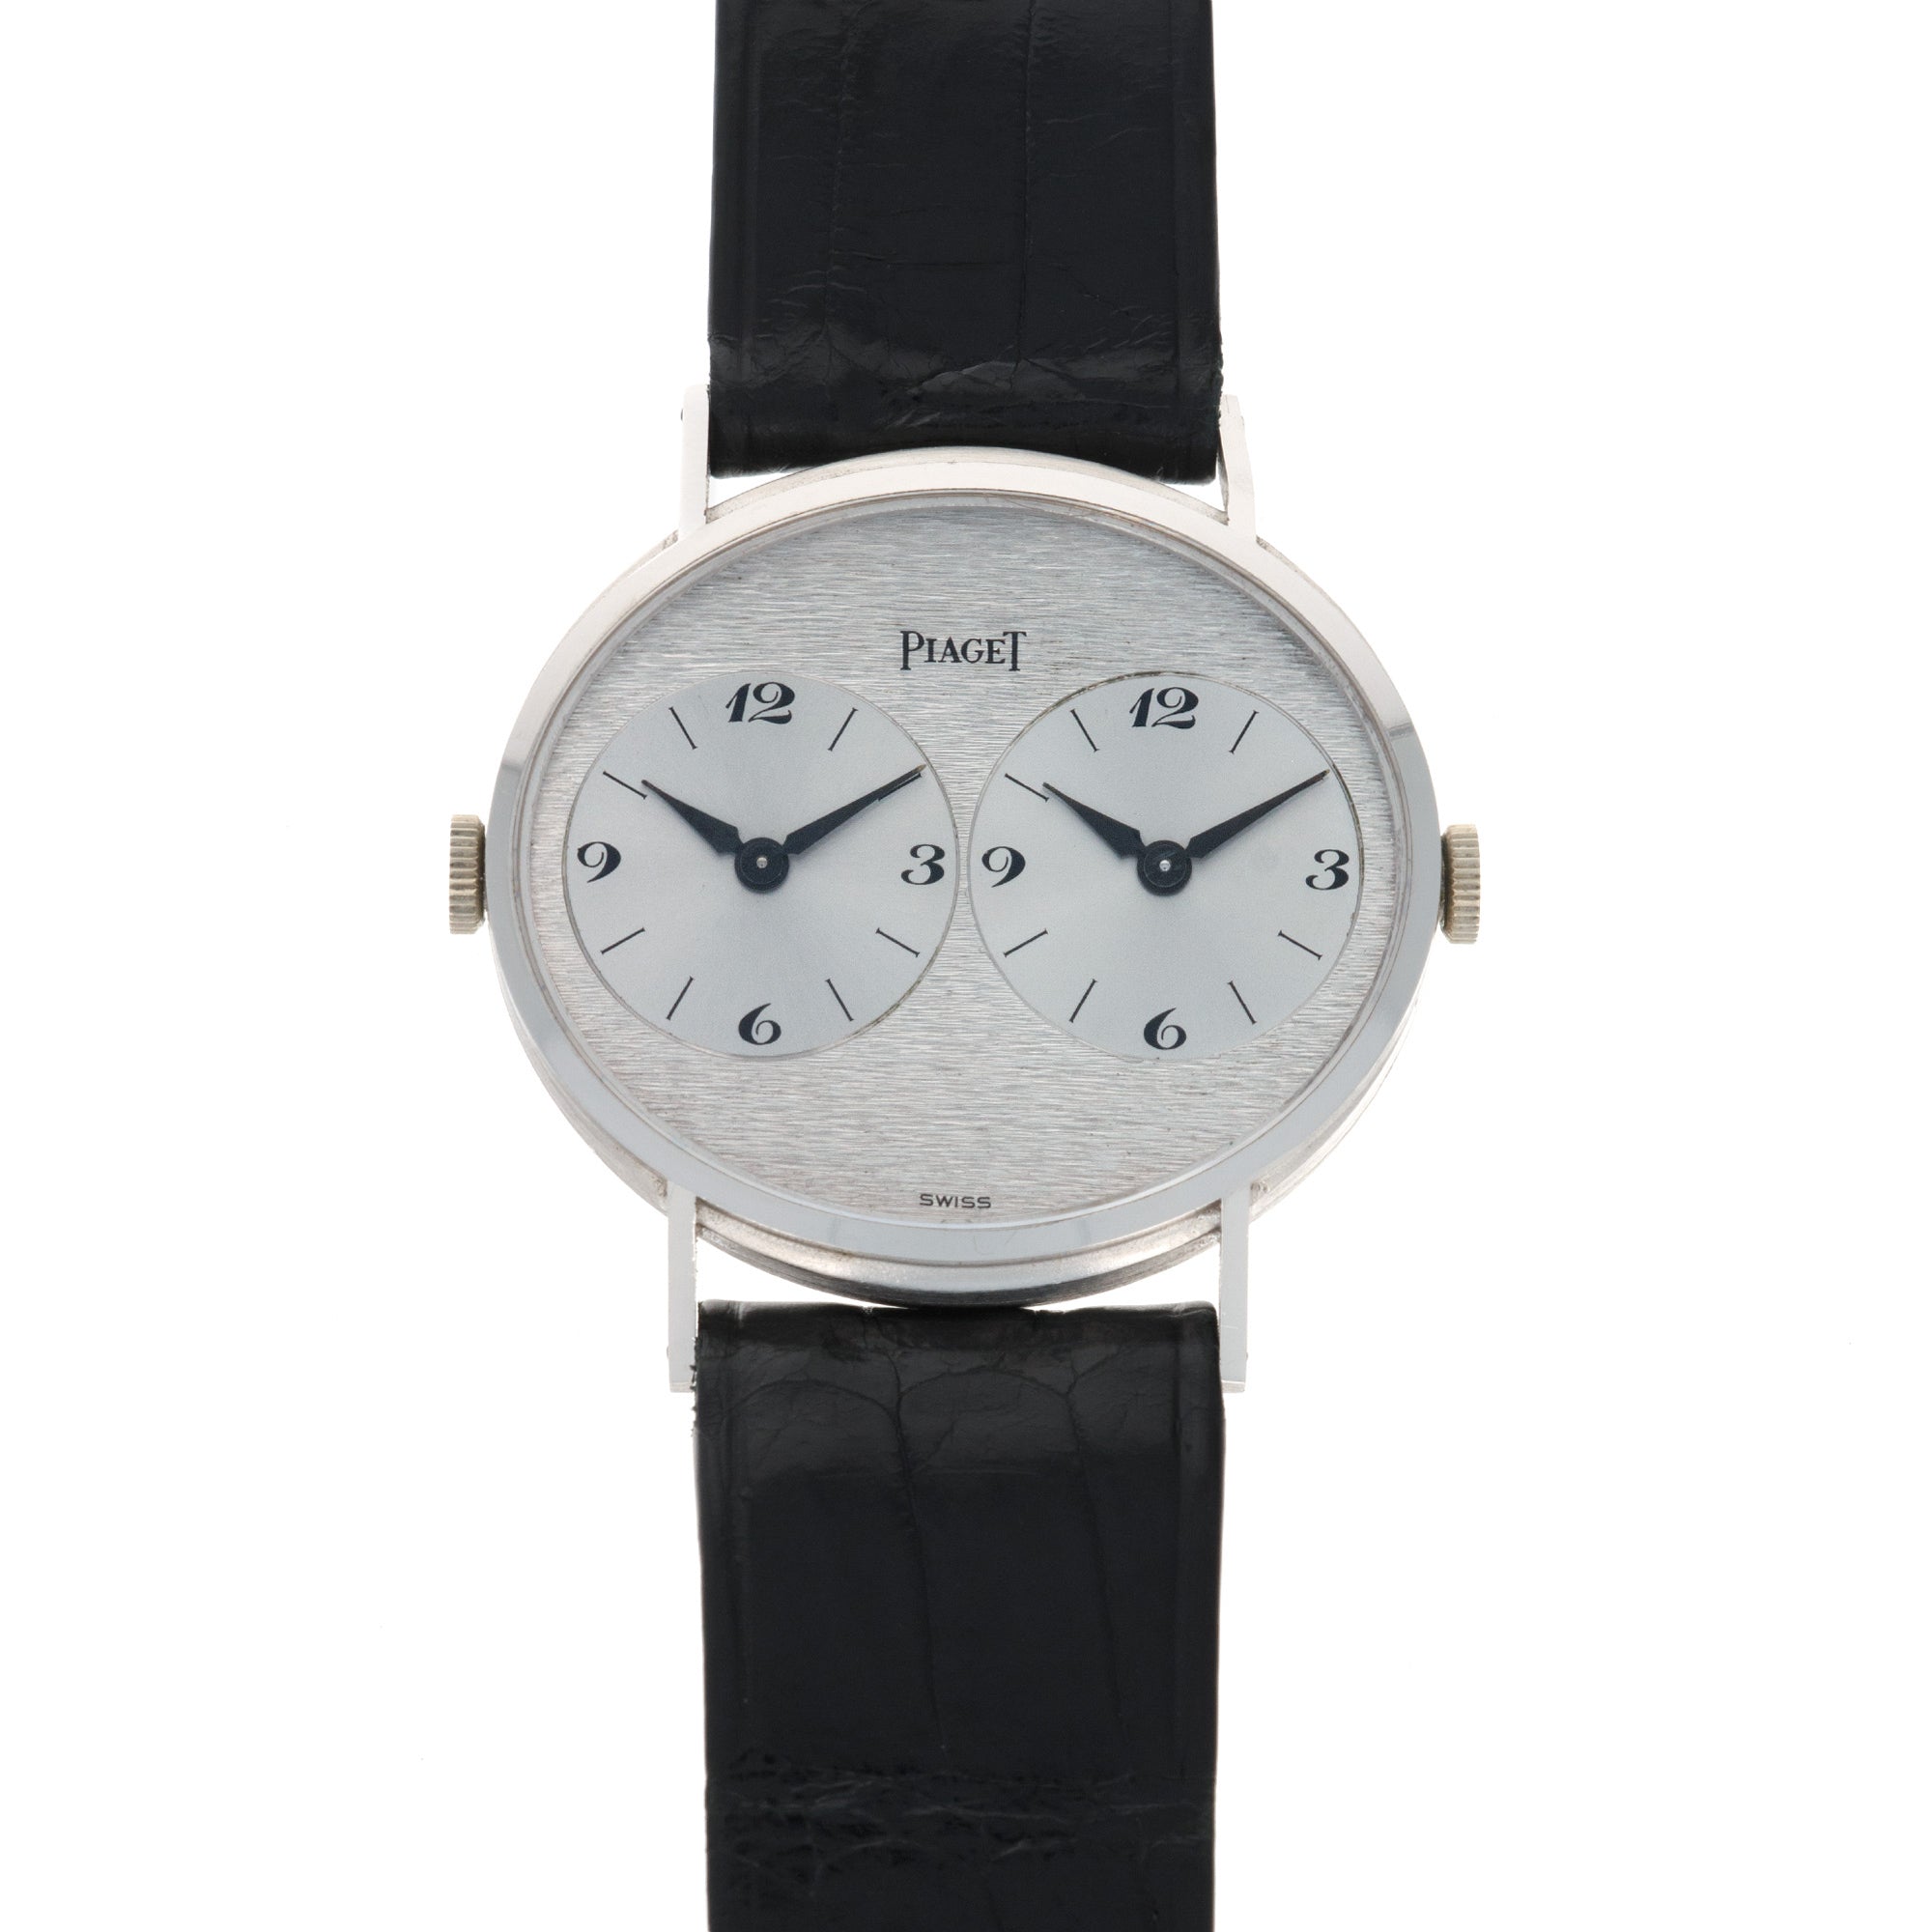 Piaget - Piaget White Gold Dual Time Watch - The Keystone Watches